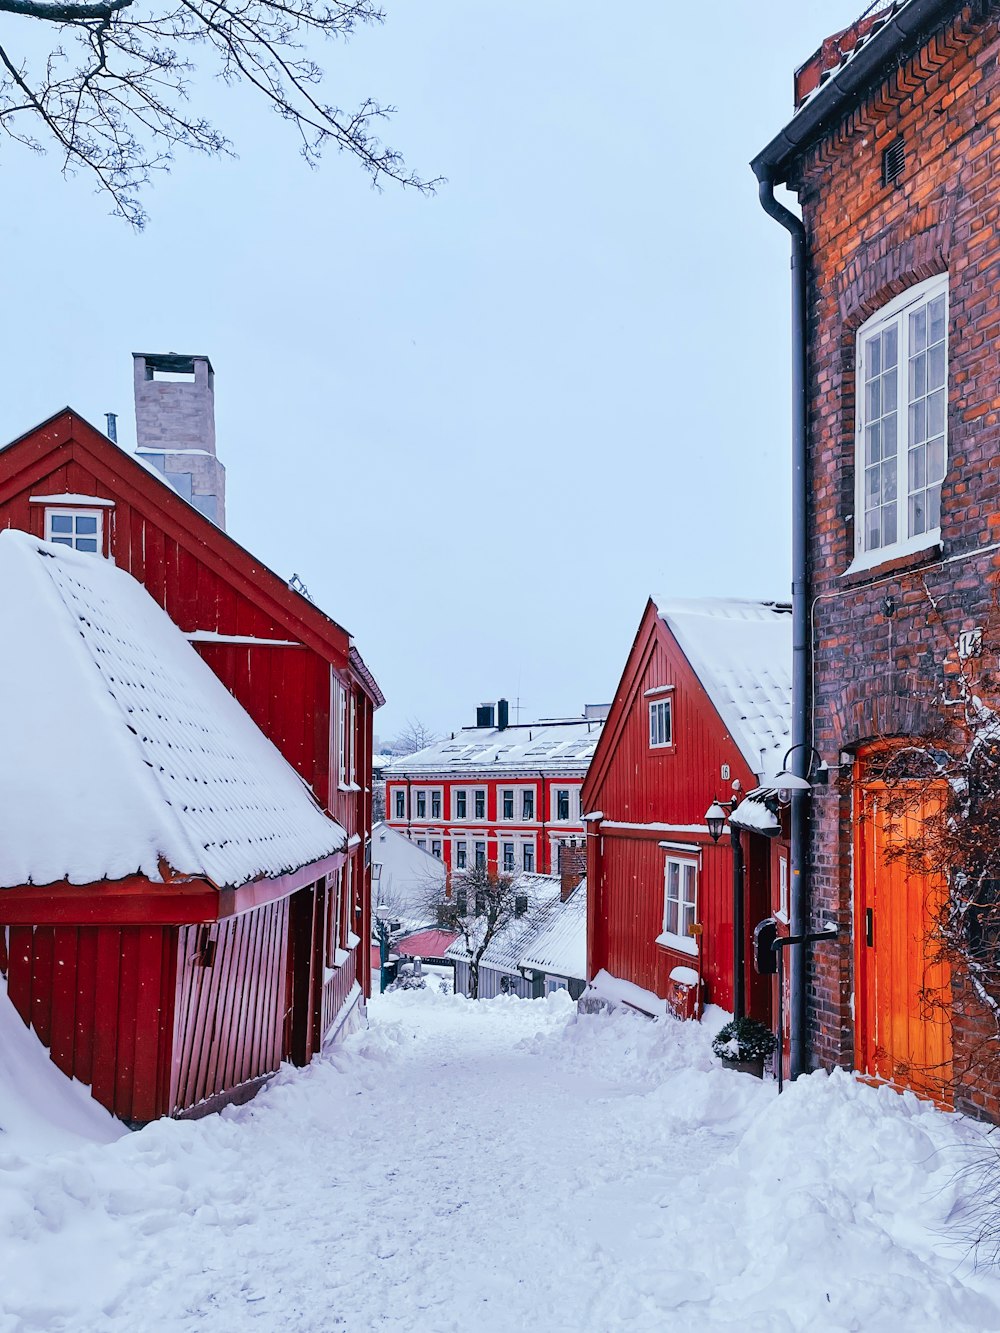 a snowy street with a red building in the background